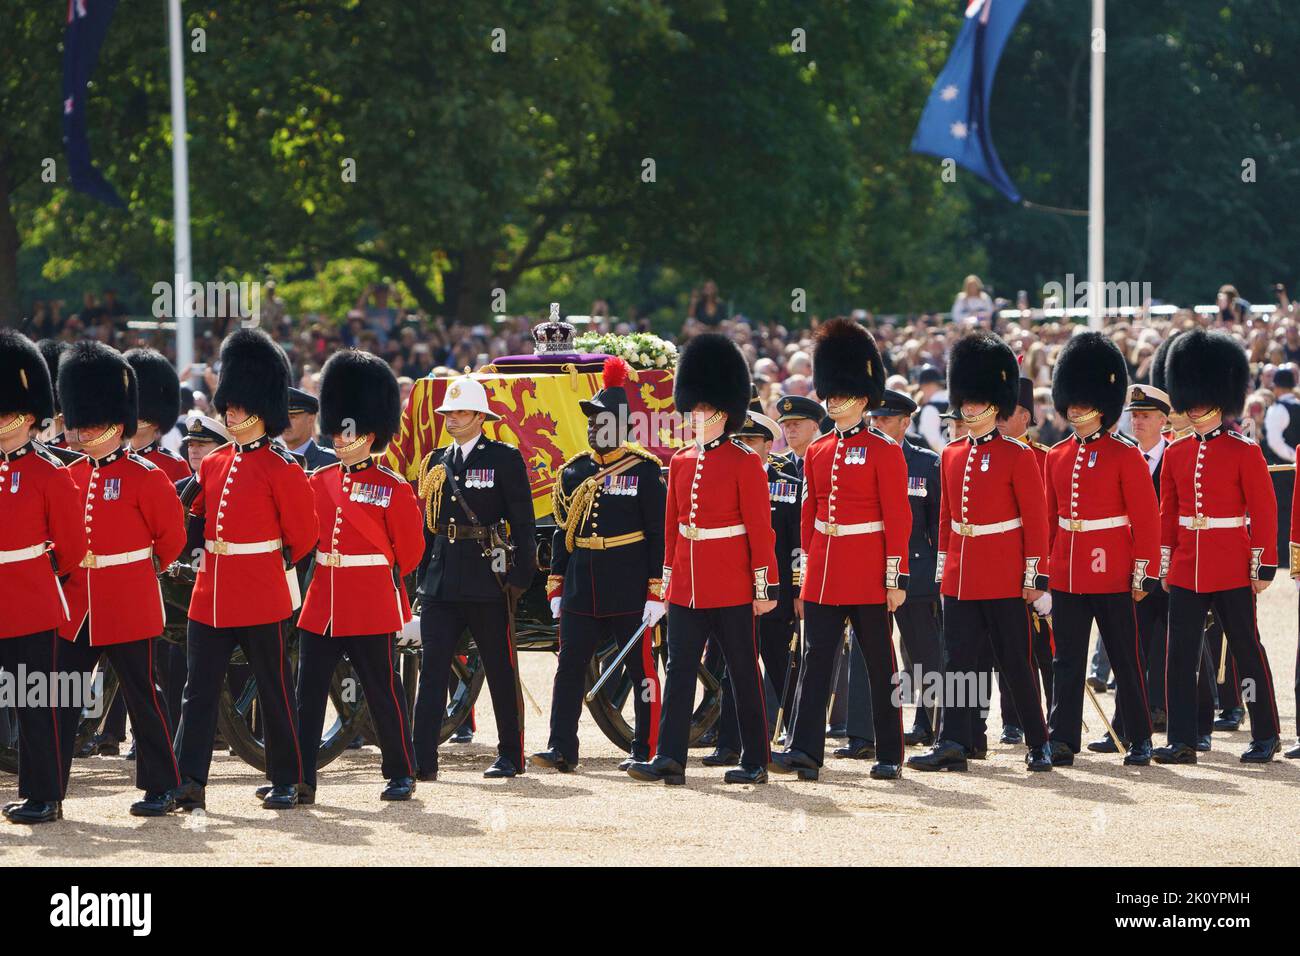 LONDON - SEPTEMBER 14: The procession of Queen Elizabeth II's coffin passes across Horse Guards Parade, travelling from Buckingham Palace to Westminster Hall. Walking behind the coffin are Prince's William and Harry, Prince Edward, Prince Andrew, Princess Anne, along with King Charles III, as it is carried on a gun carriage, followed by other members of the Royal Family, on September 14, 2022. Credit: David Levenson/Alamy Live News Stock Photo